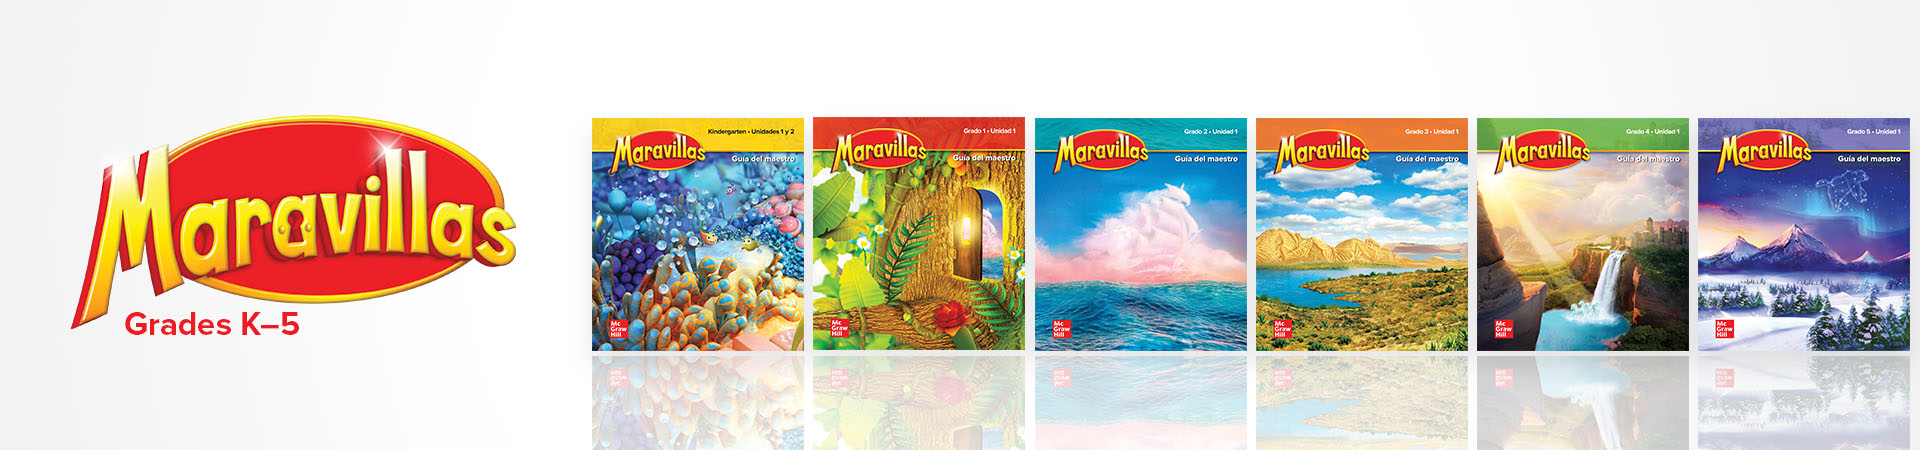 logo and textbook covers for Maravillas spanish language arts curriculum